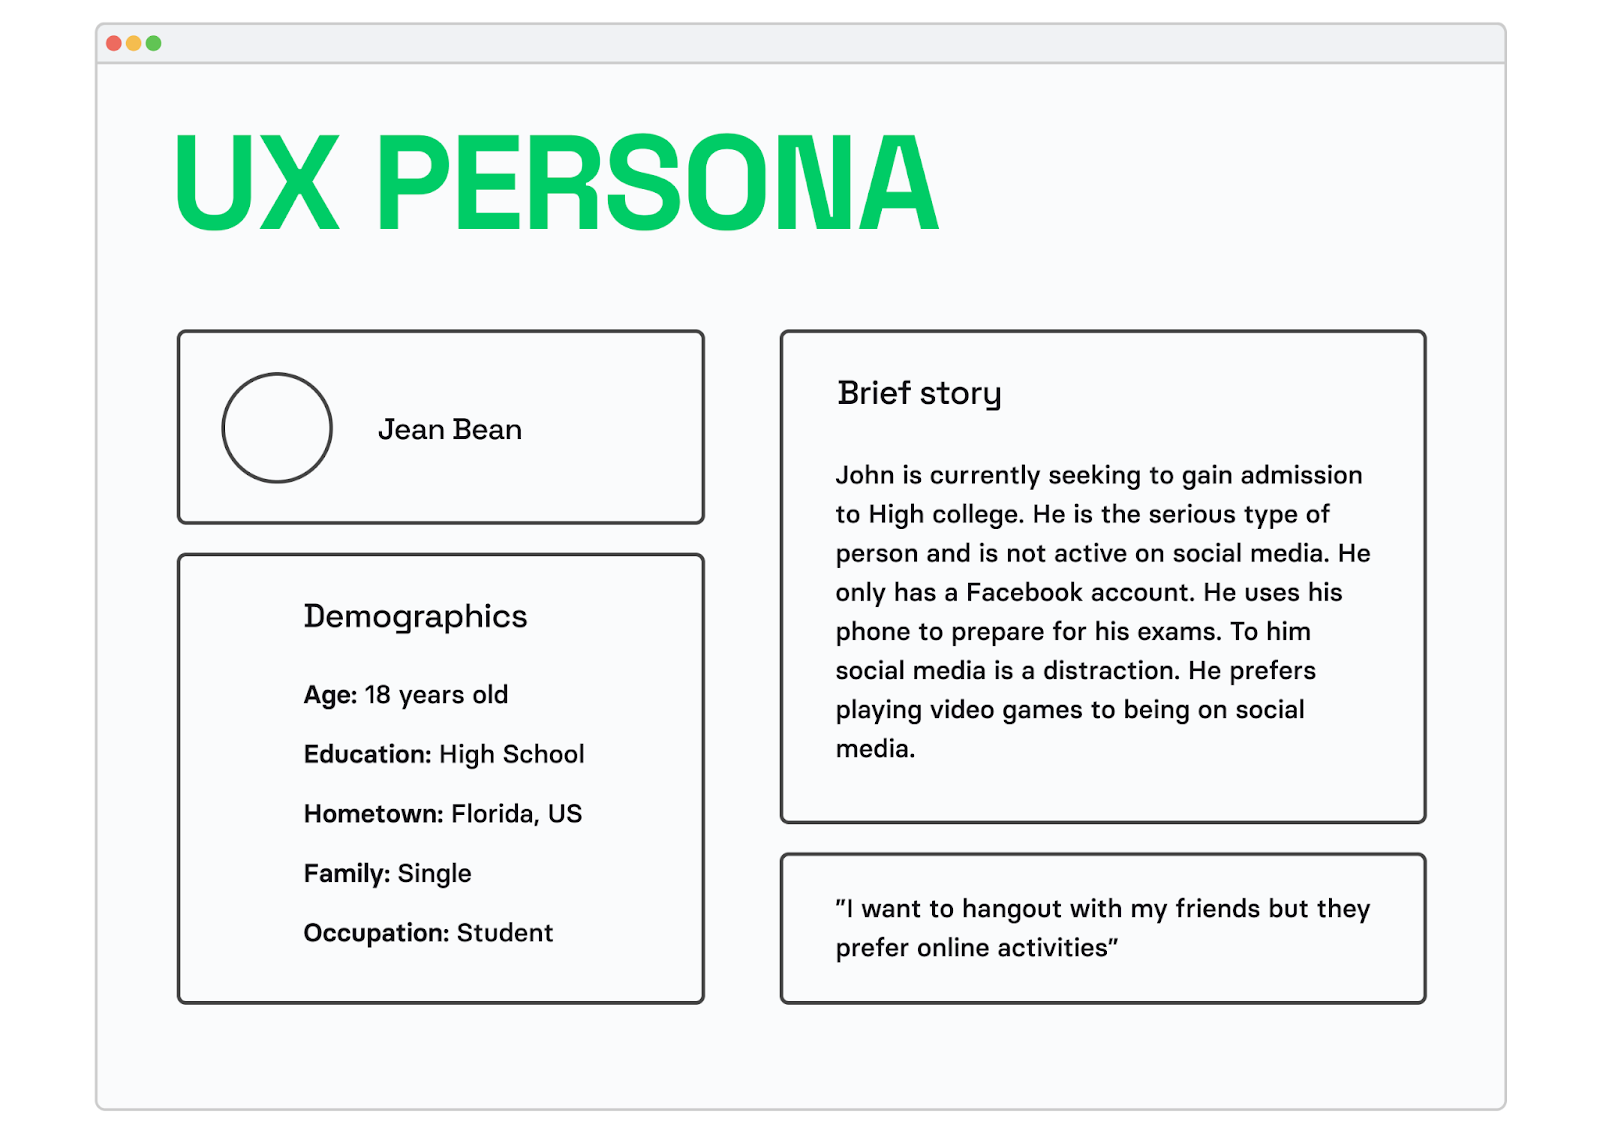 How to identify and fix app design issues: step-by-step process. Step 3: Create personas and use cases
